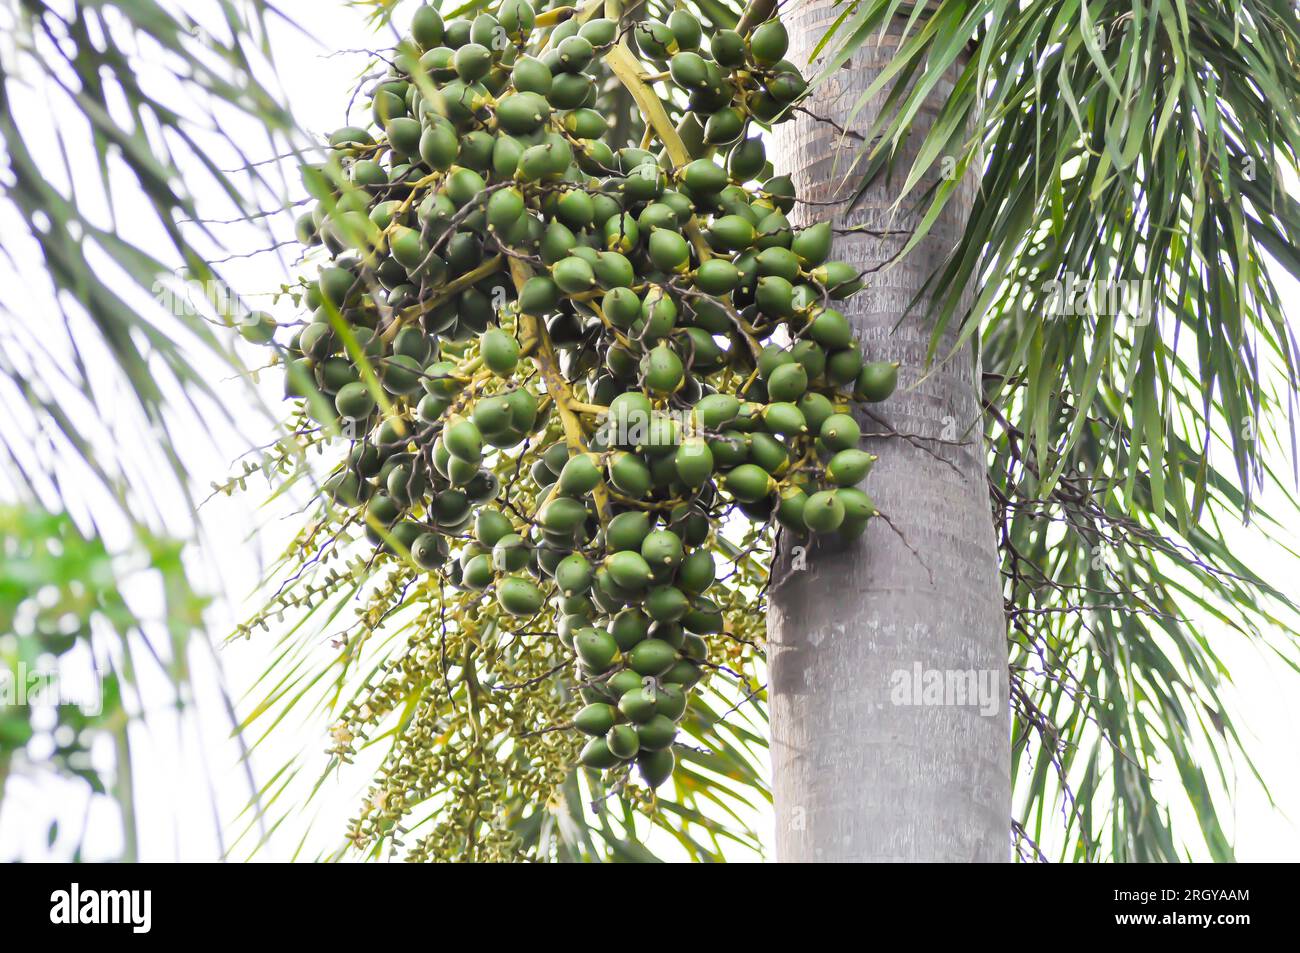 seed of betel palm or betel nut or palm tree and palm seed Stock Photo